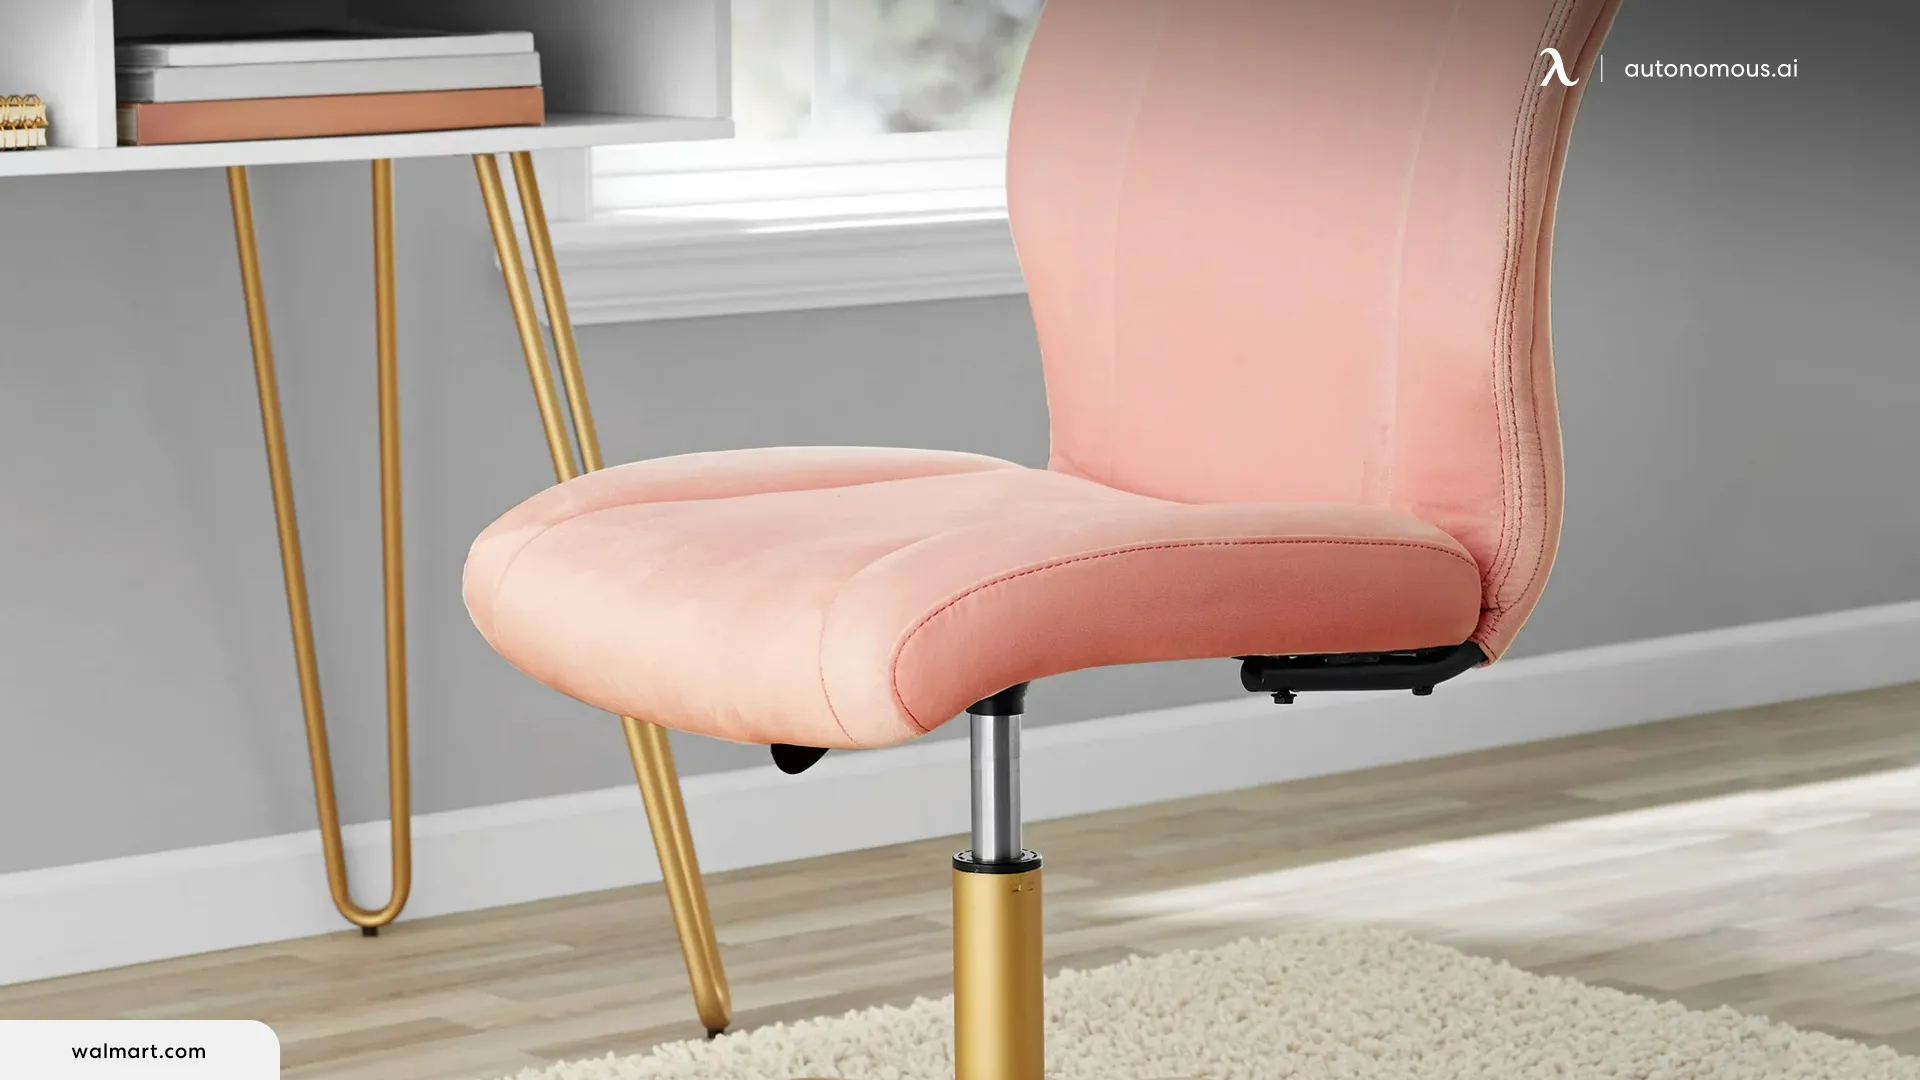 Mainstays - office chair for petite women